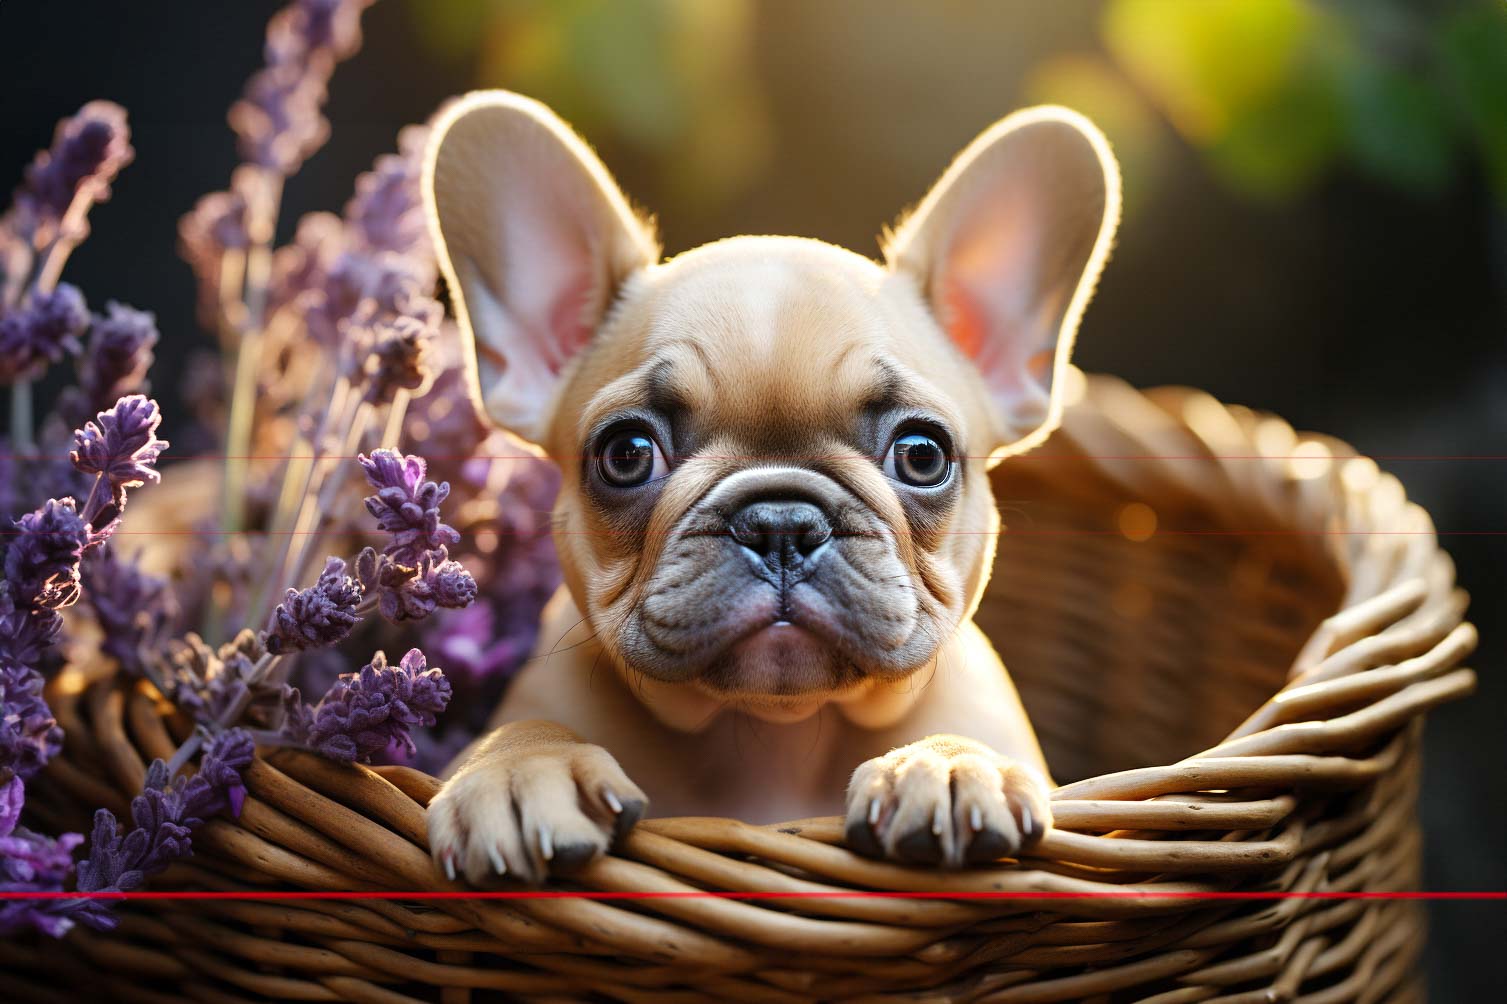 A picture of a french bulldog puppy peers over the edge of a wicker basket, surrounded by purple flowers, with large expressive eyes and bat-like ears highlighted under soft lighting.